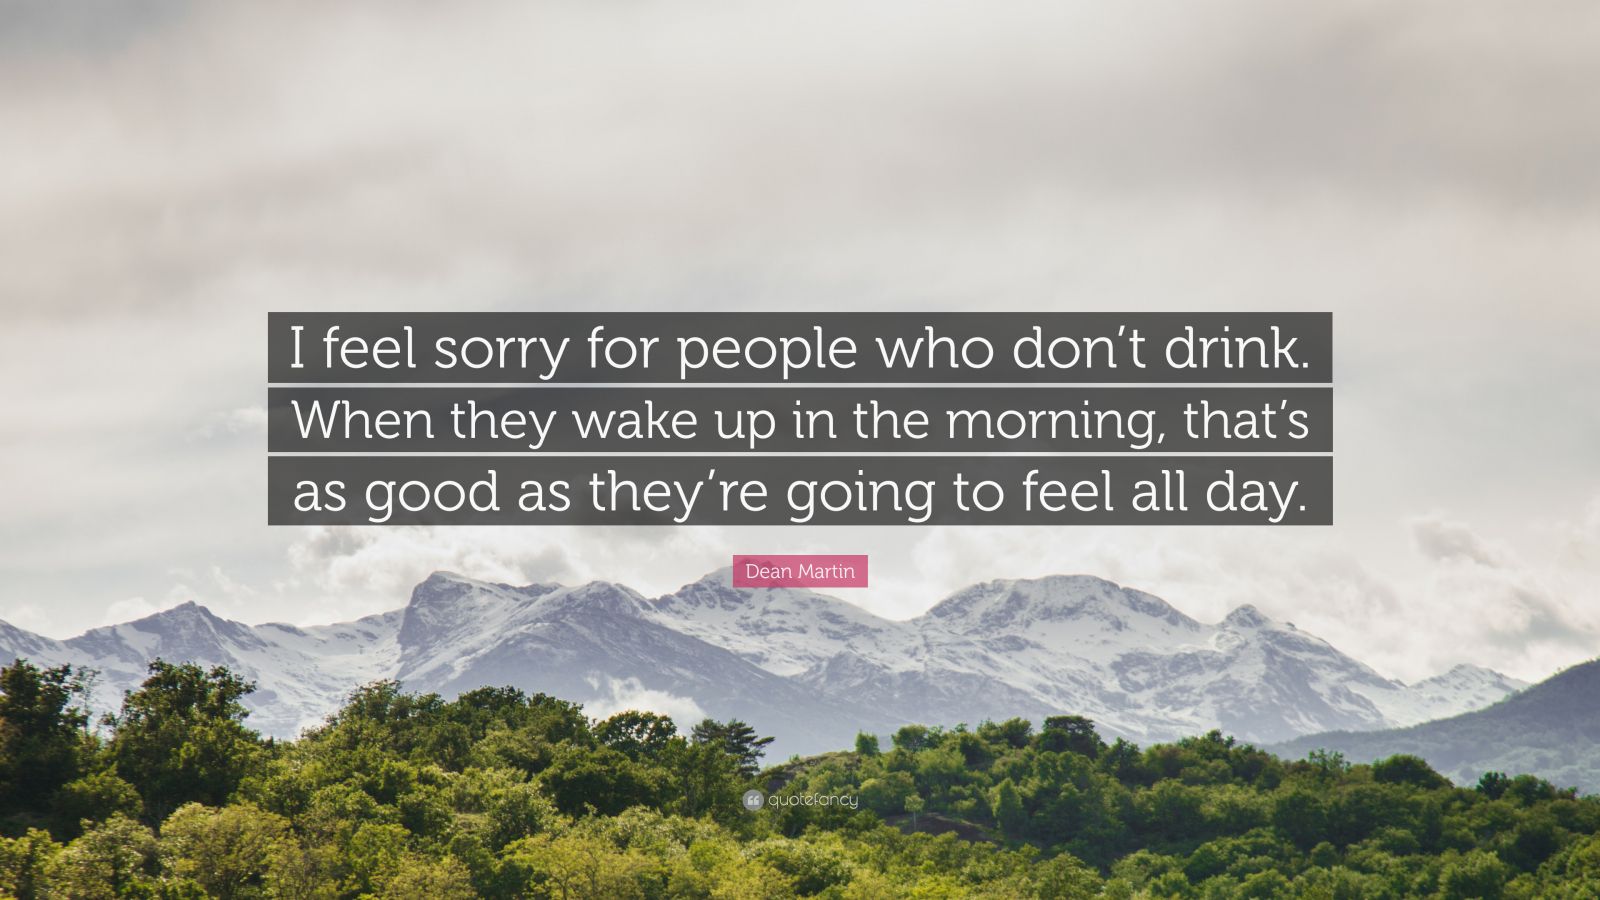 Dean Martin Quote: “I feel sorry for people who don’t drink. When they wake up in the morning, that’s as good as they’re going to feel all day.”